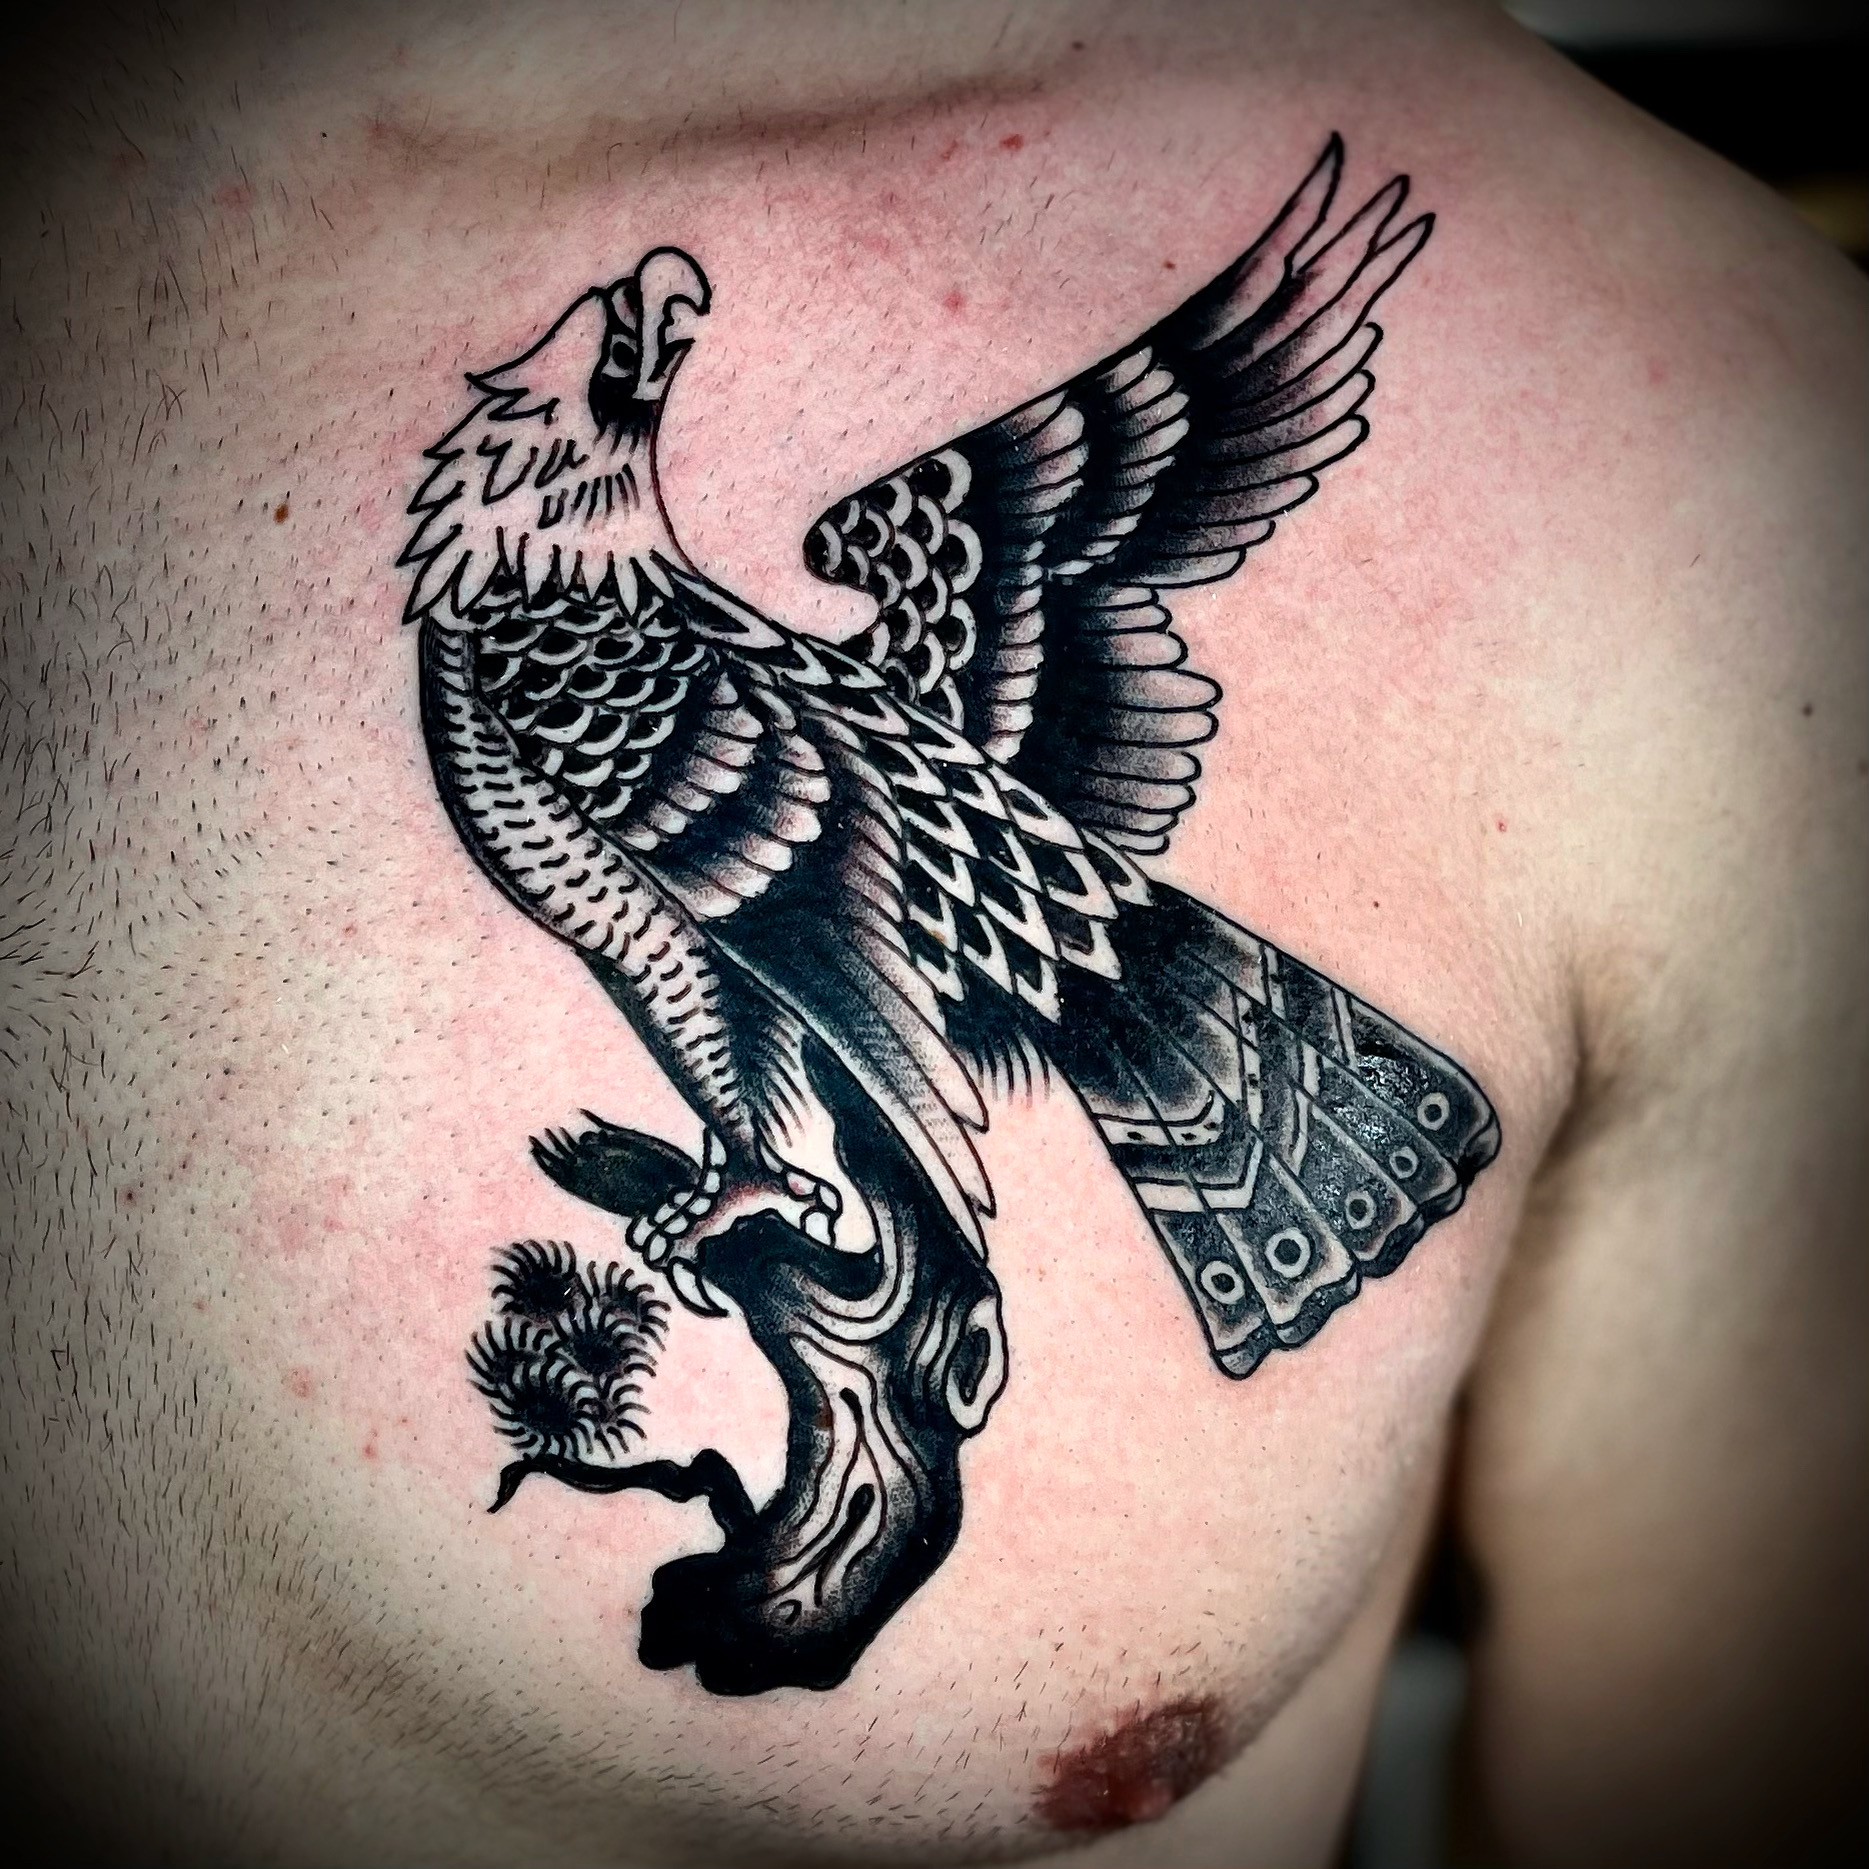 Tattoo of an eagle from best tattoo shops in dallas tx